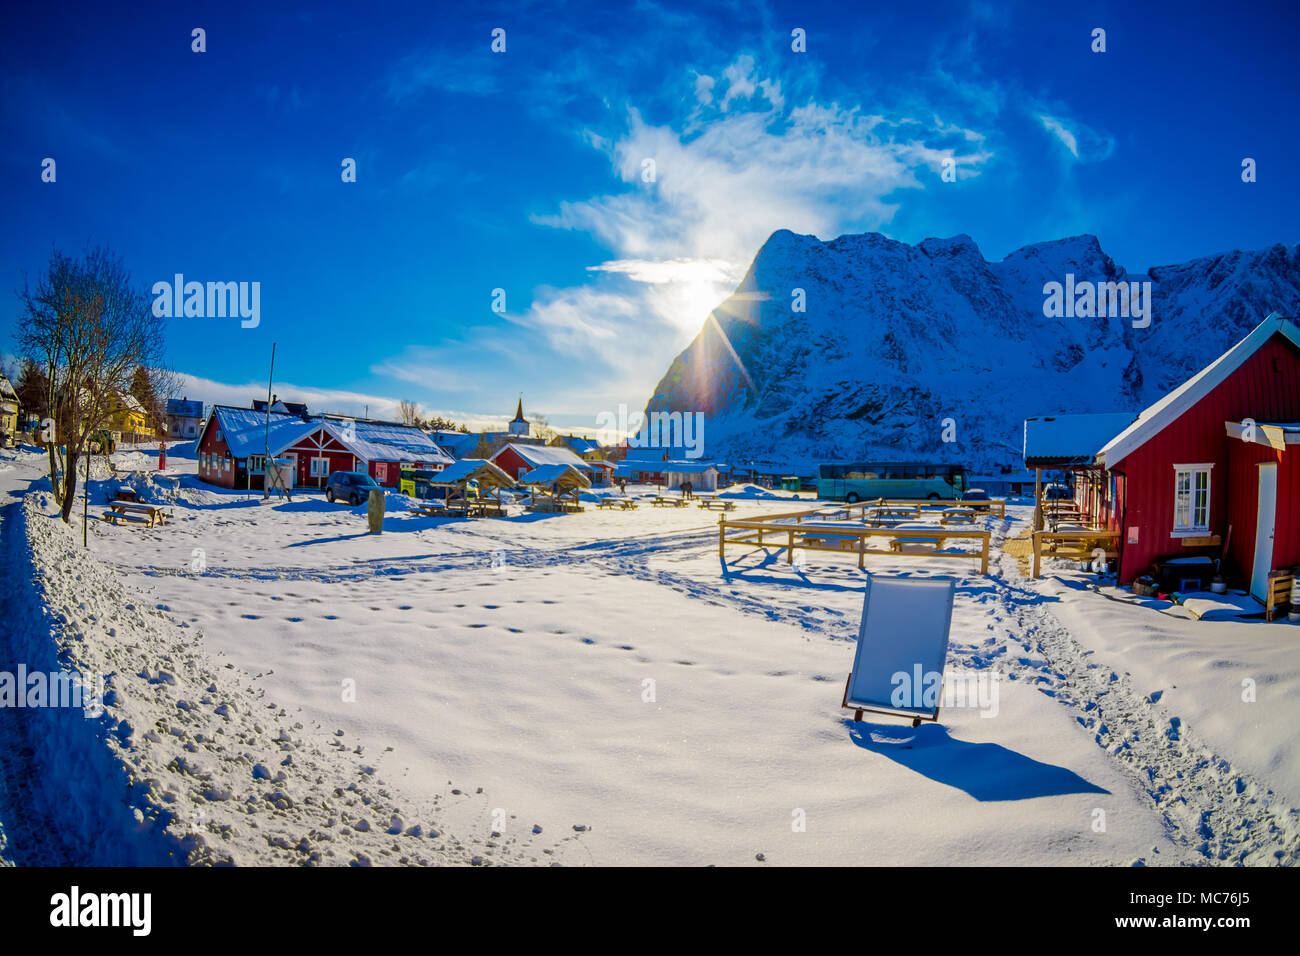 SVOLVAER, LOFOTEN ISLANDS, NORWAY - APRIL 10, 2018: Outdoor view of beautiful rorbu or fisherman houses in a small town in Svolvaer Lofoten Islands Stock Photo